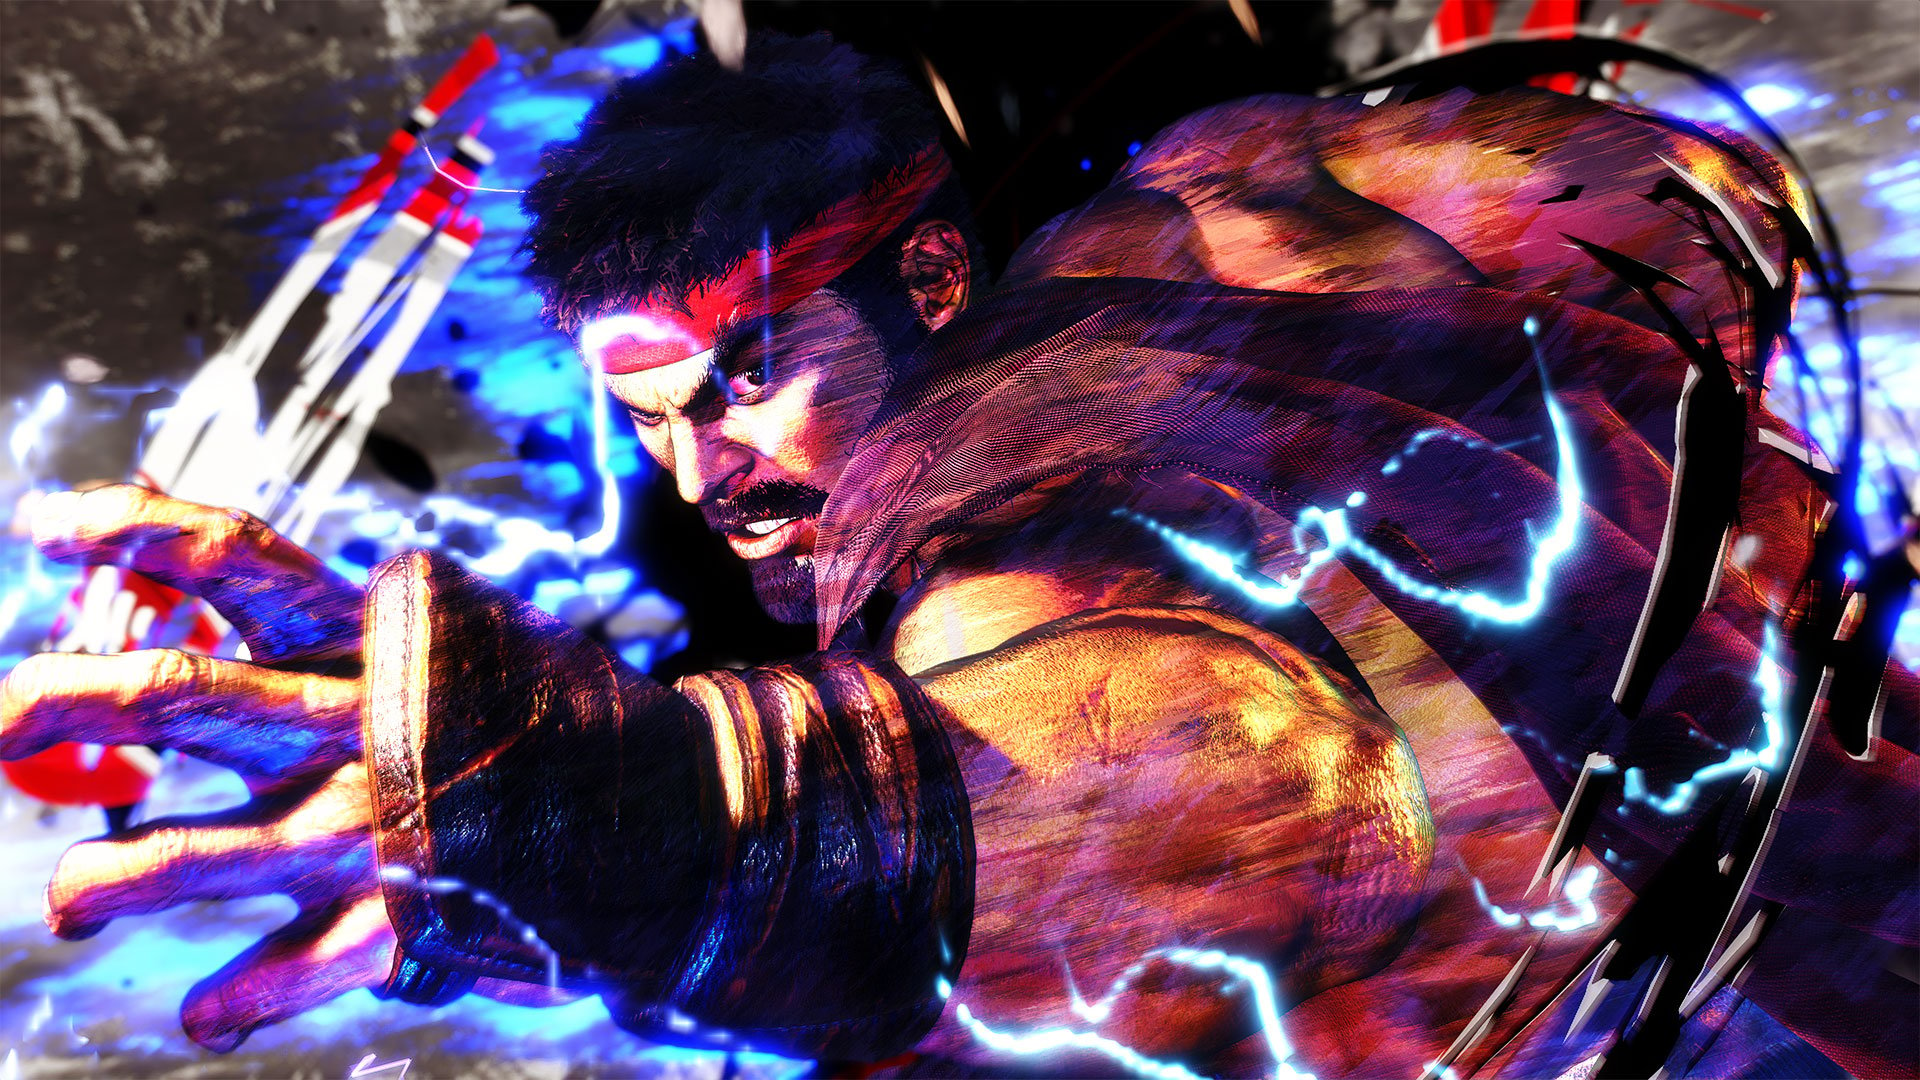 Street Fighter 6 confirmed for 2023, coming to PC, PlayStation and